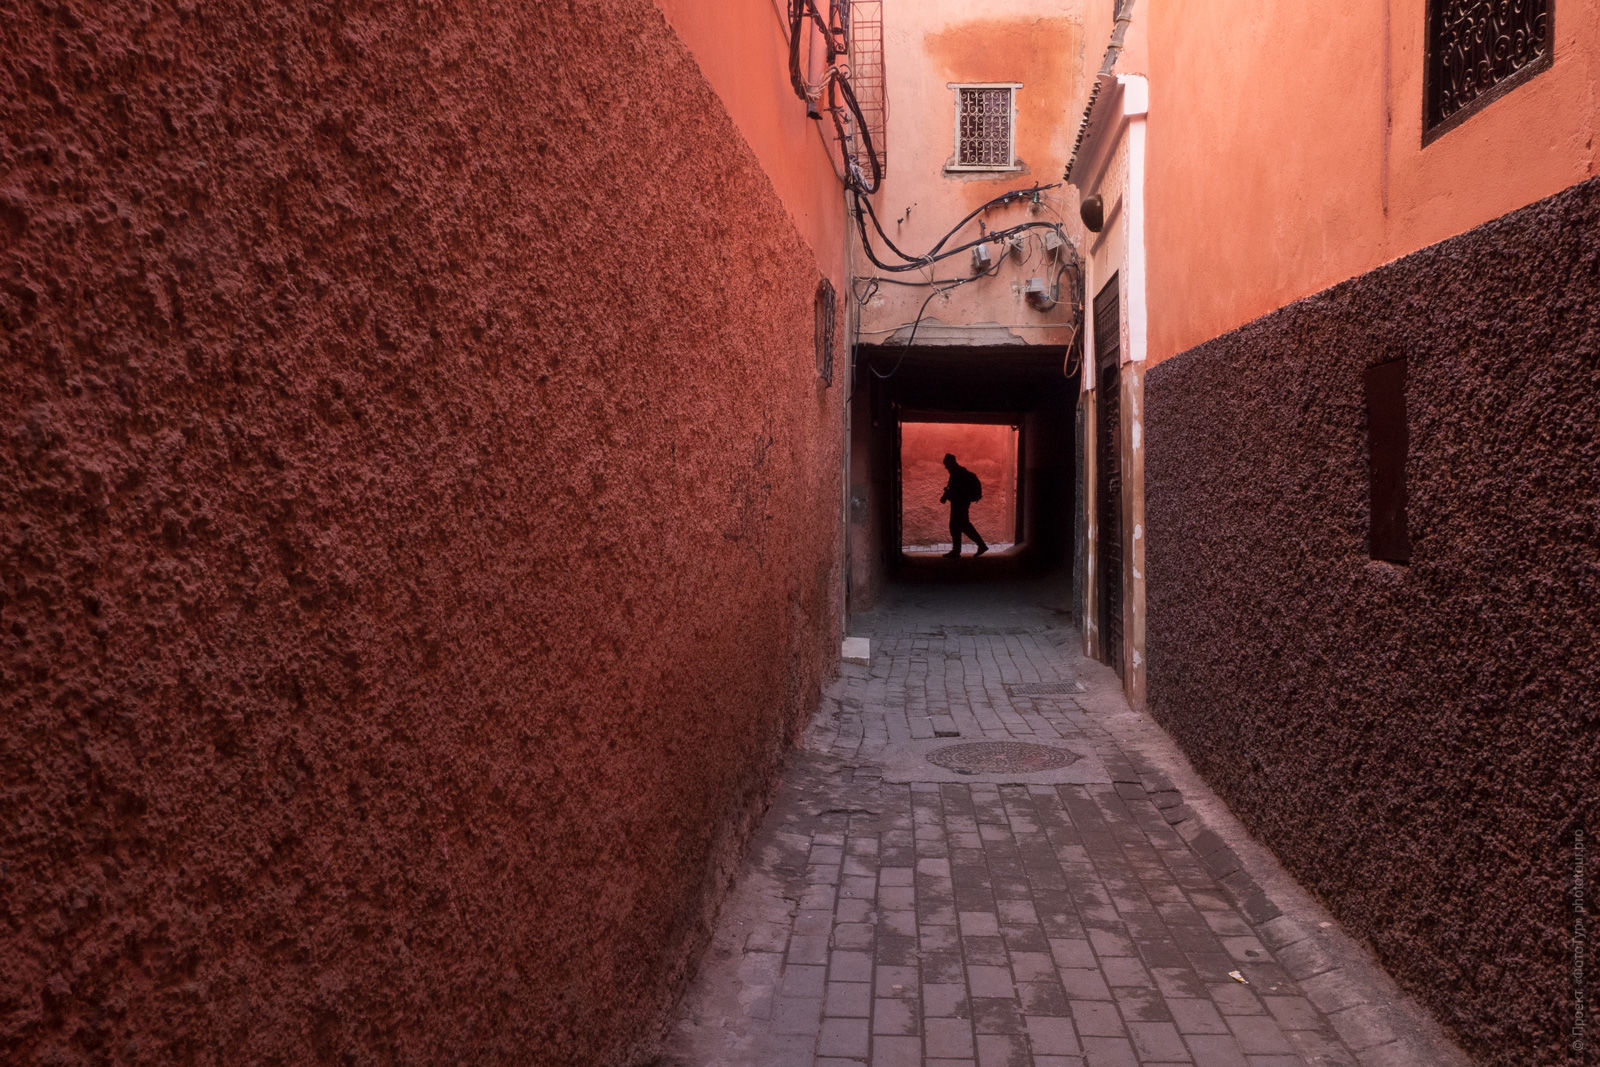 The back streets of the medina of Marrakesh, Morocco. Adventure photo tour: medina, cascades, sands and ports of Morocco, April 4 - 17, 2020.